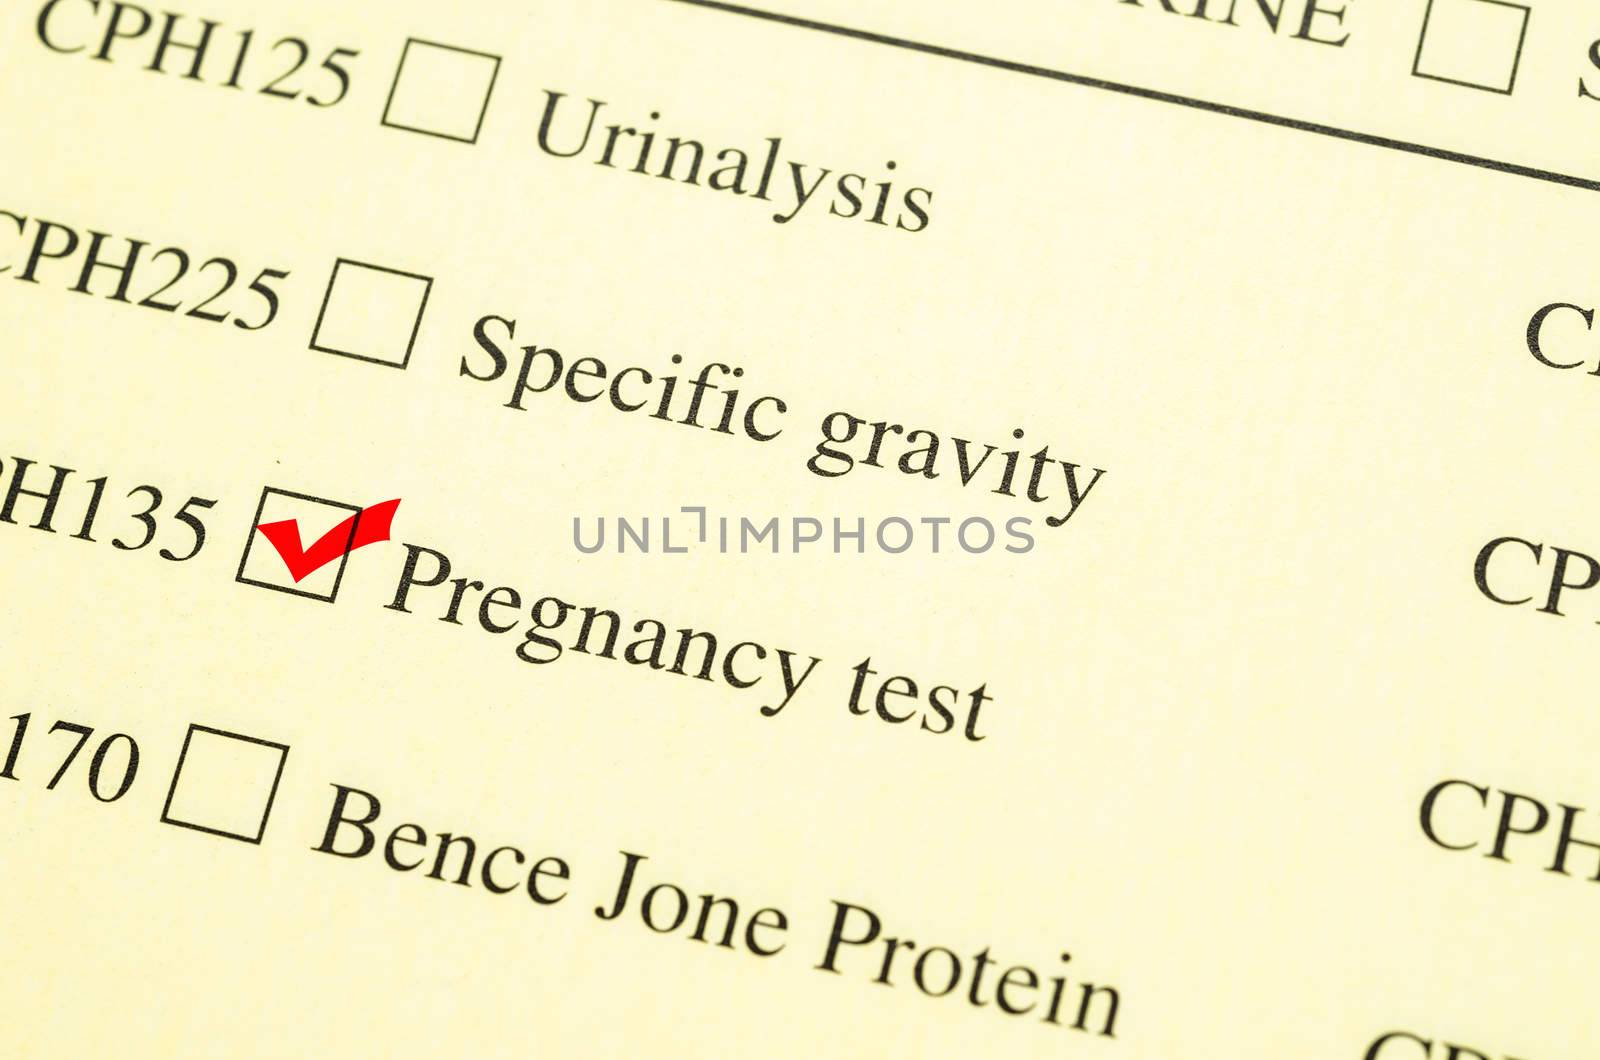 Check mark Medical form request Pregnancy test in laboratory